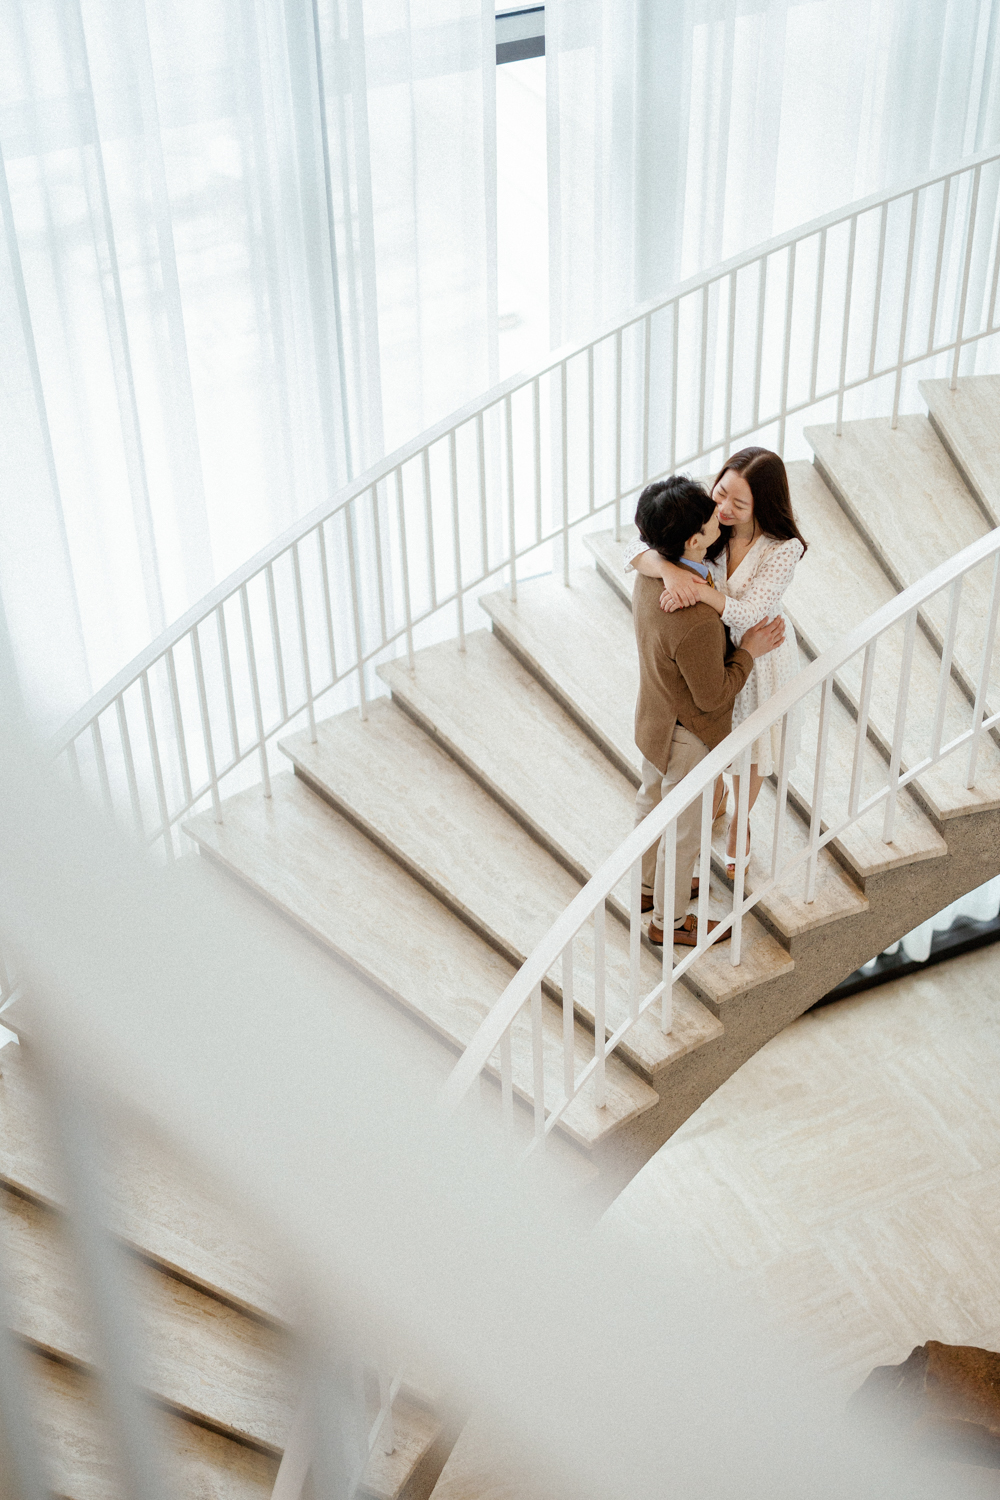 Art Institute staircase engagement photo